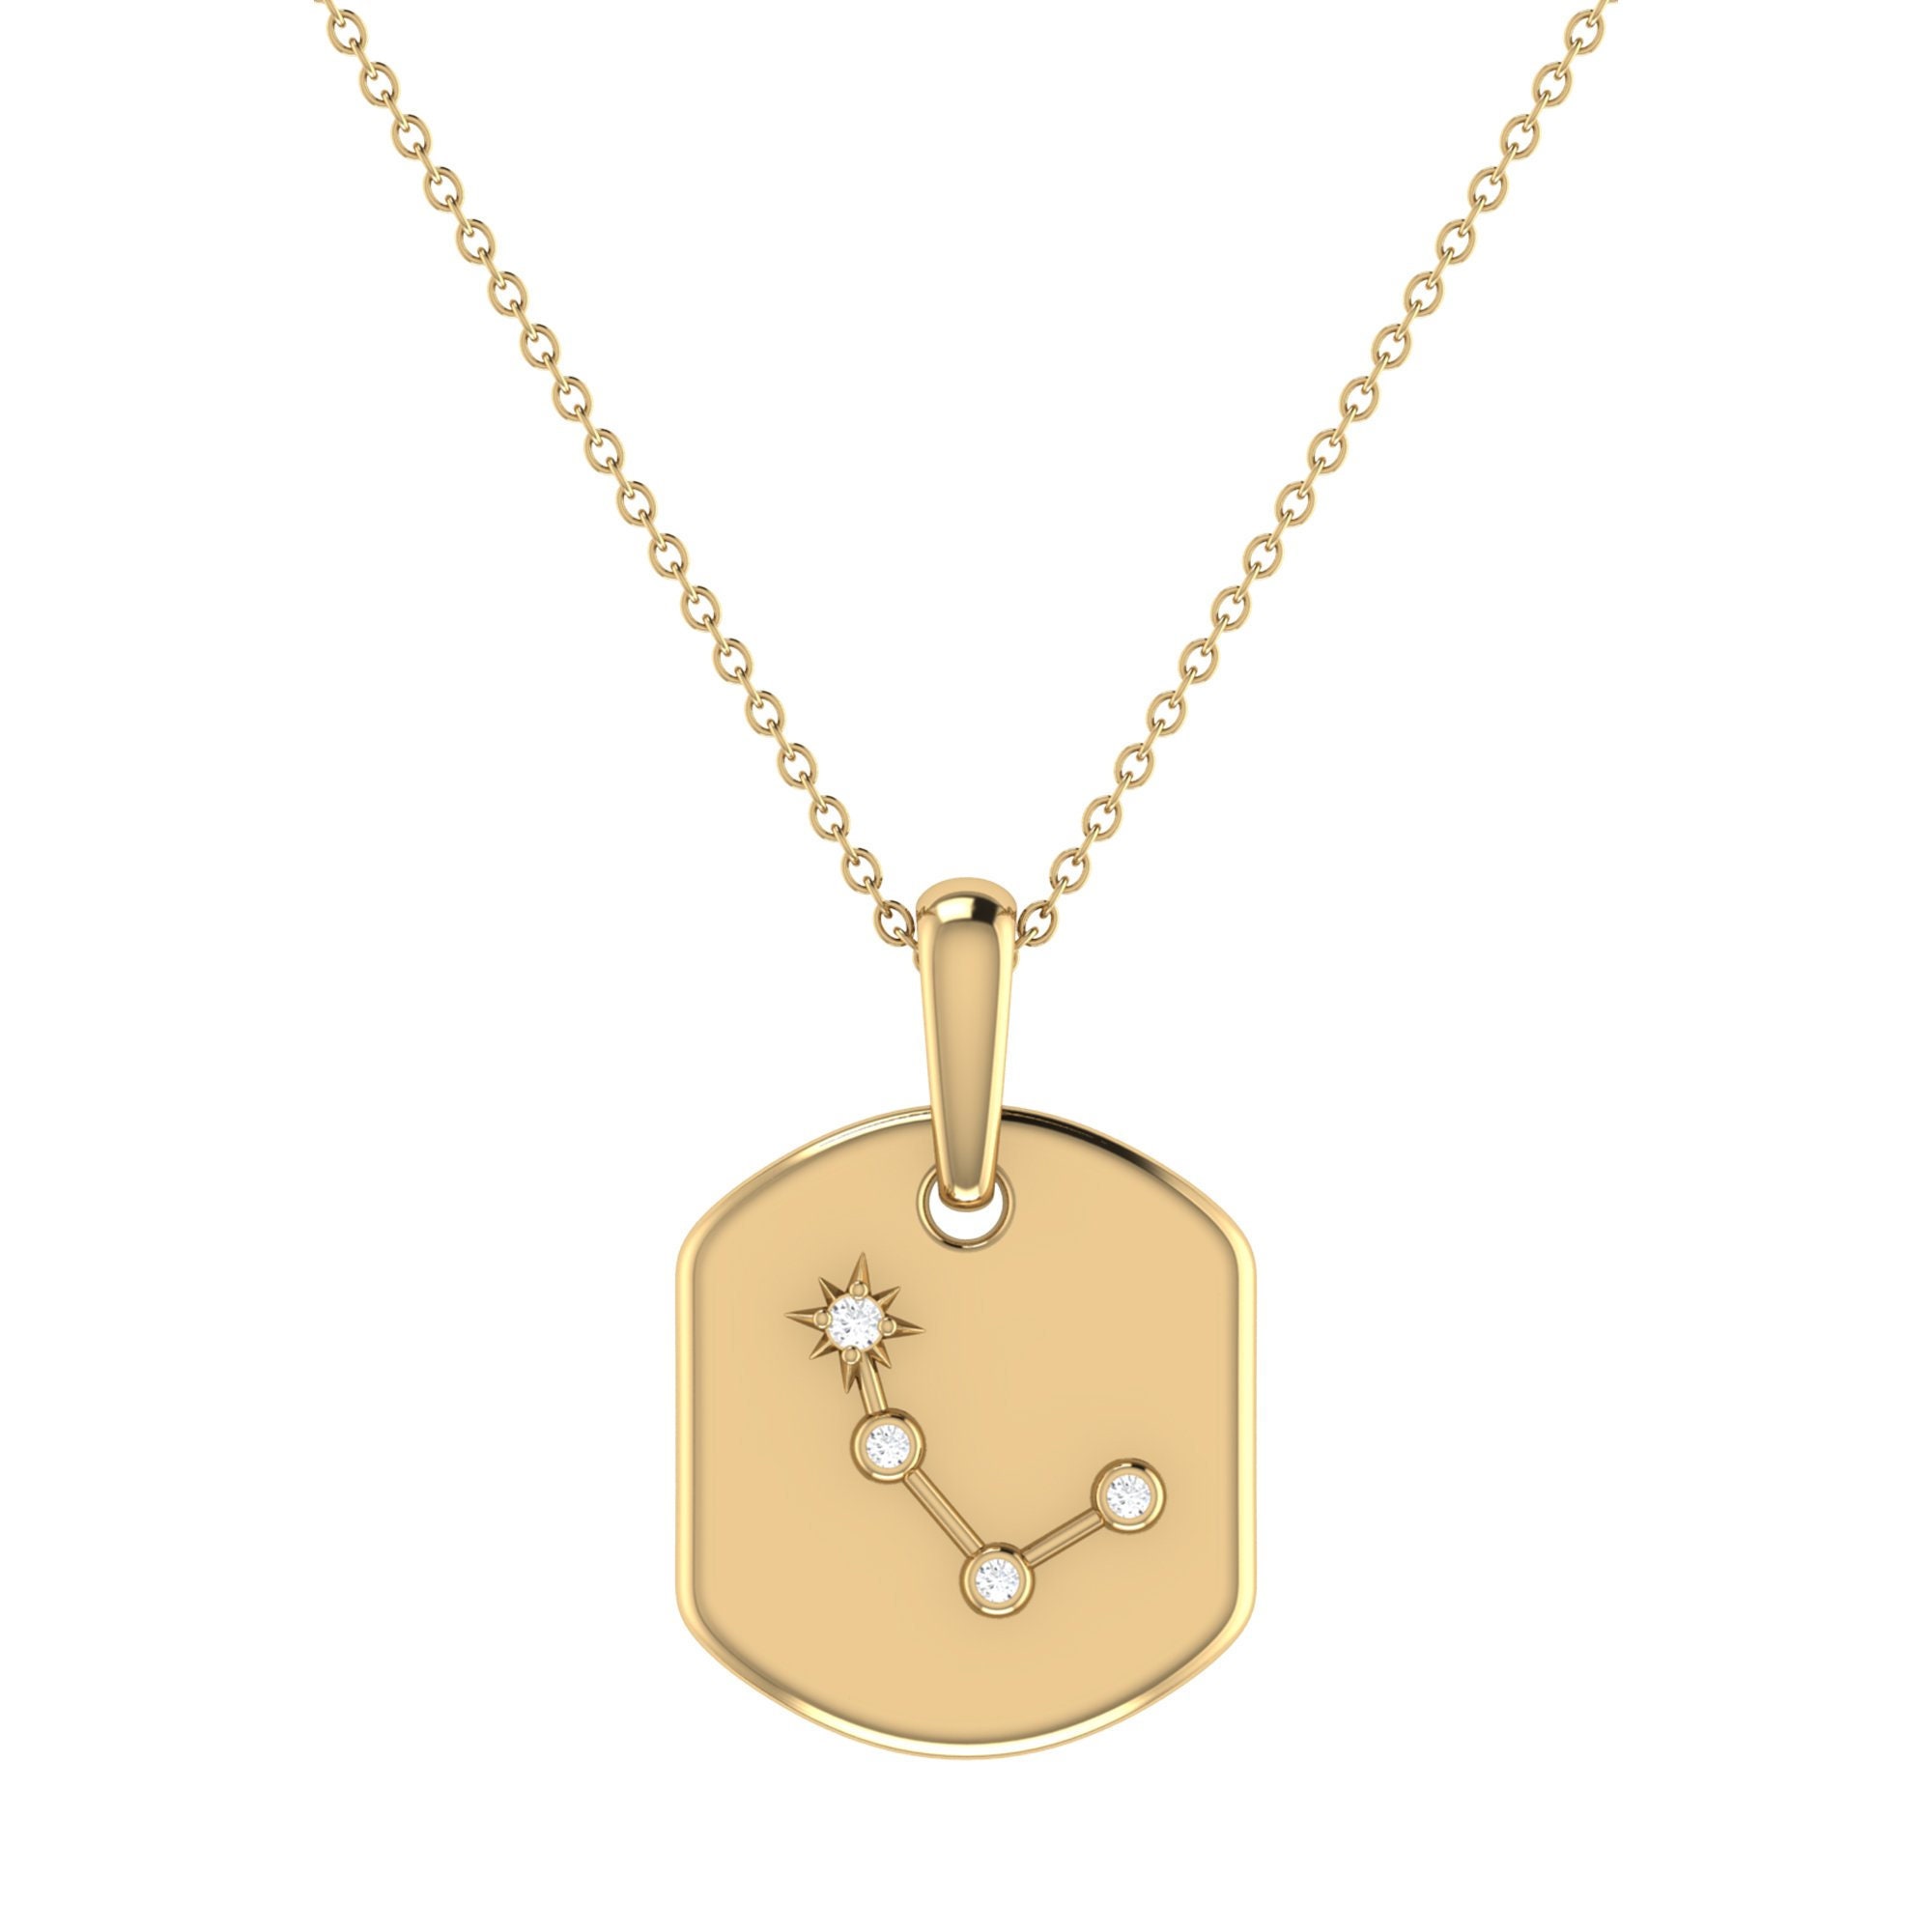 Aries Ram Constellation Tag Pendant Necklace in 14K Gold Vermeil